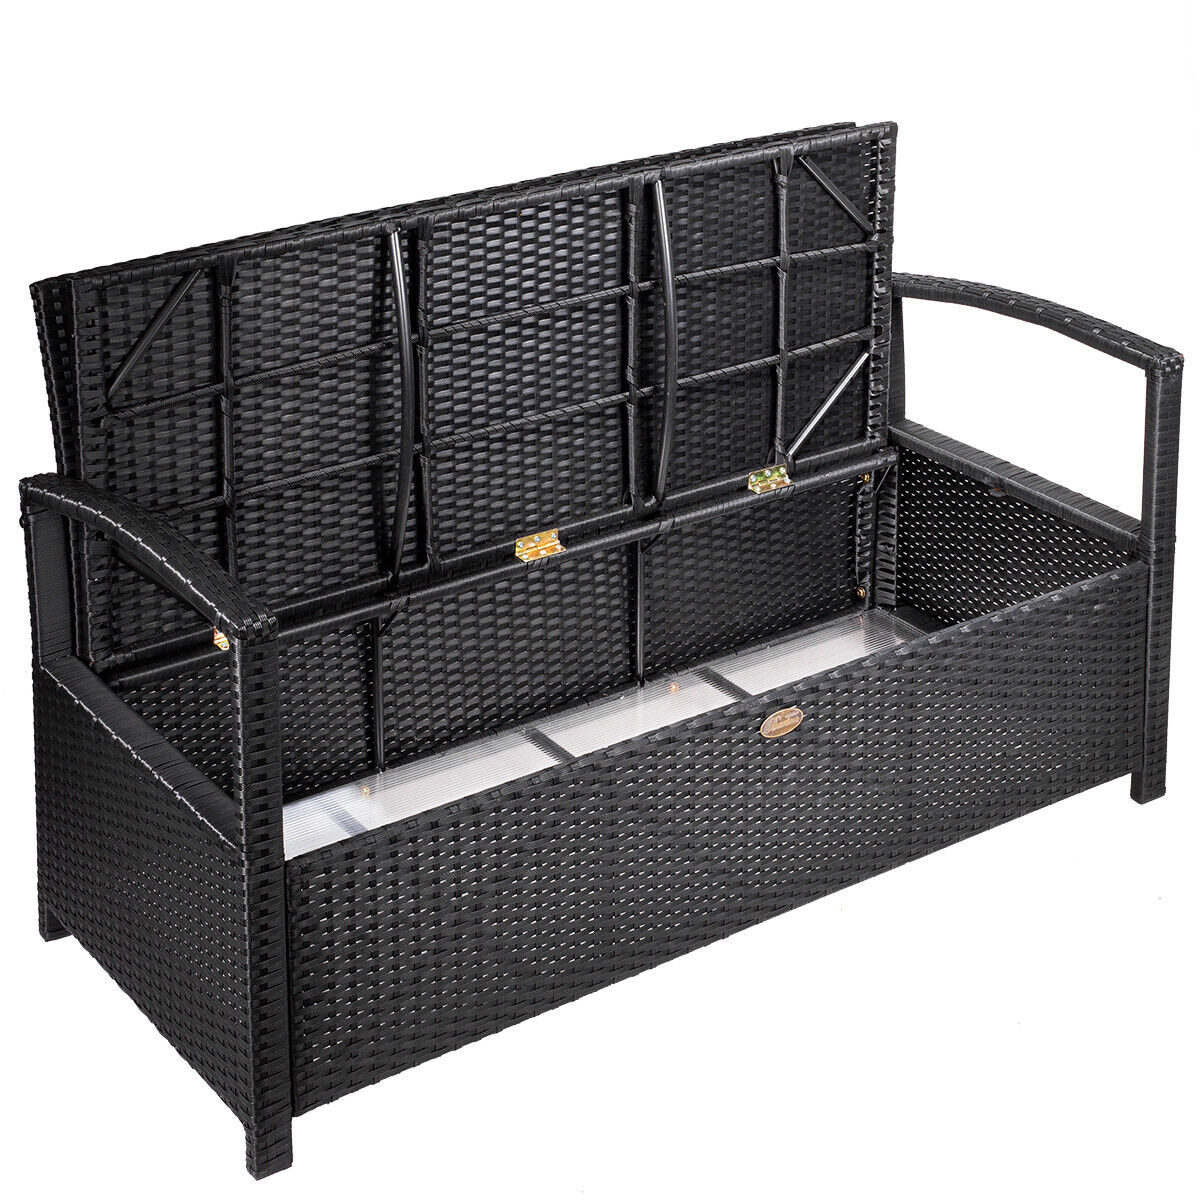 Black Deck Storage Box Bench With Seat Cushion Outdoor Patio Furniture